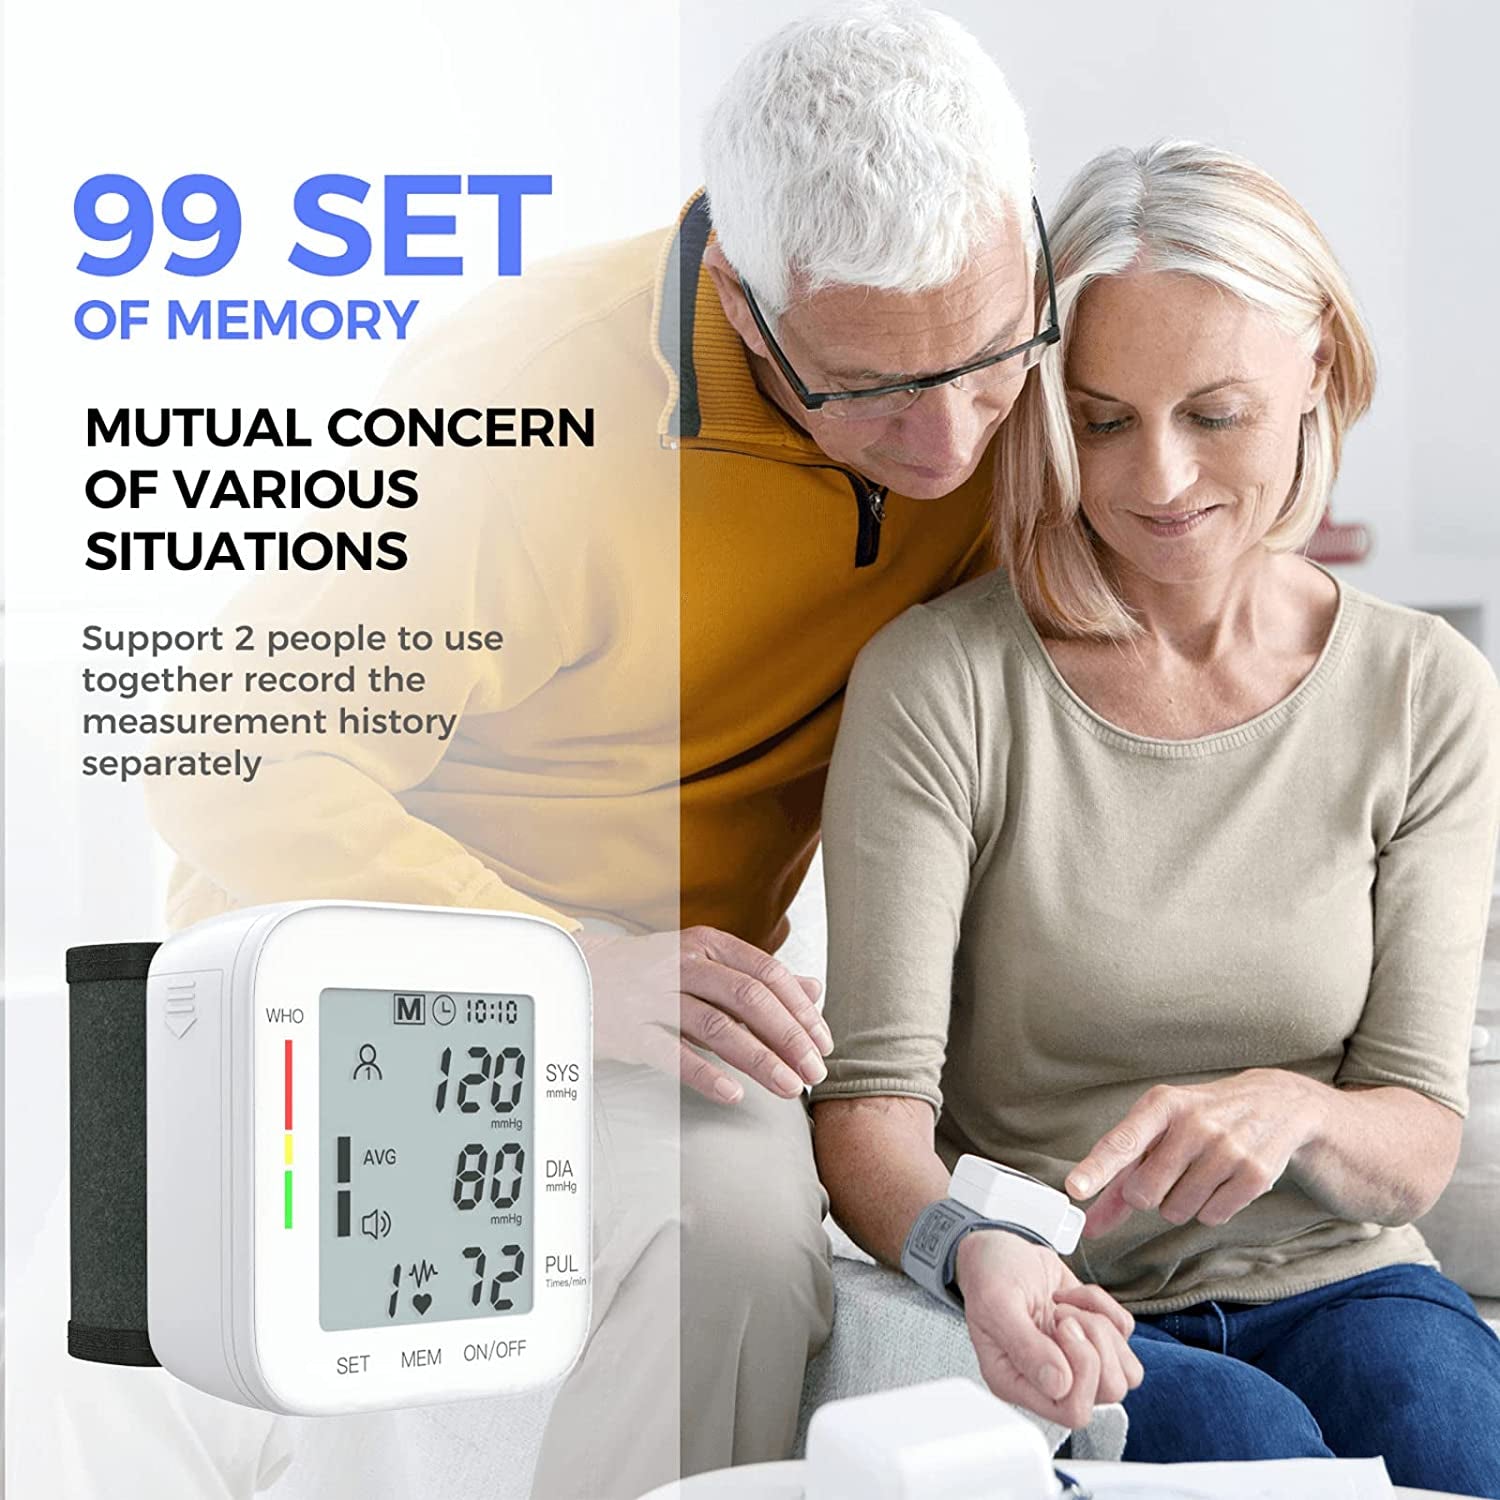 Wrist Blood Pressure Monitor Bp Monitor Large LCD Display Blood Pressure Machine Adjustable Wrist Cuff 5.31-7.68Inch Automatic 99X2 Sets Memory with Carrying Case for Home Use (W1681)